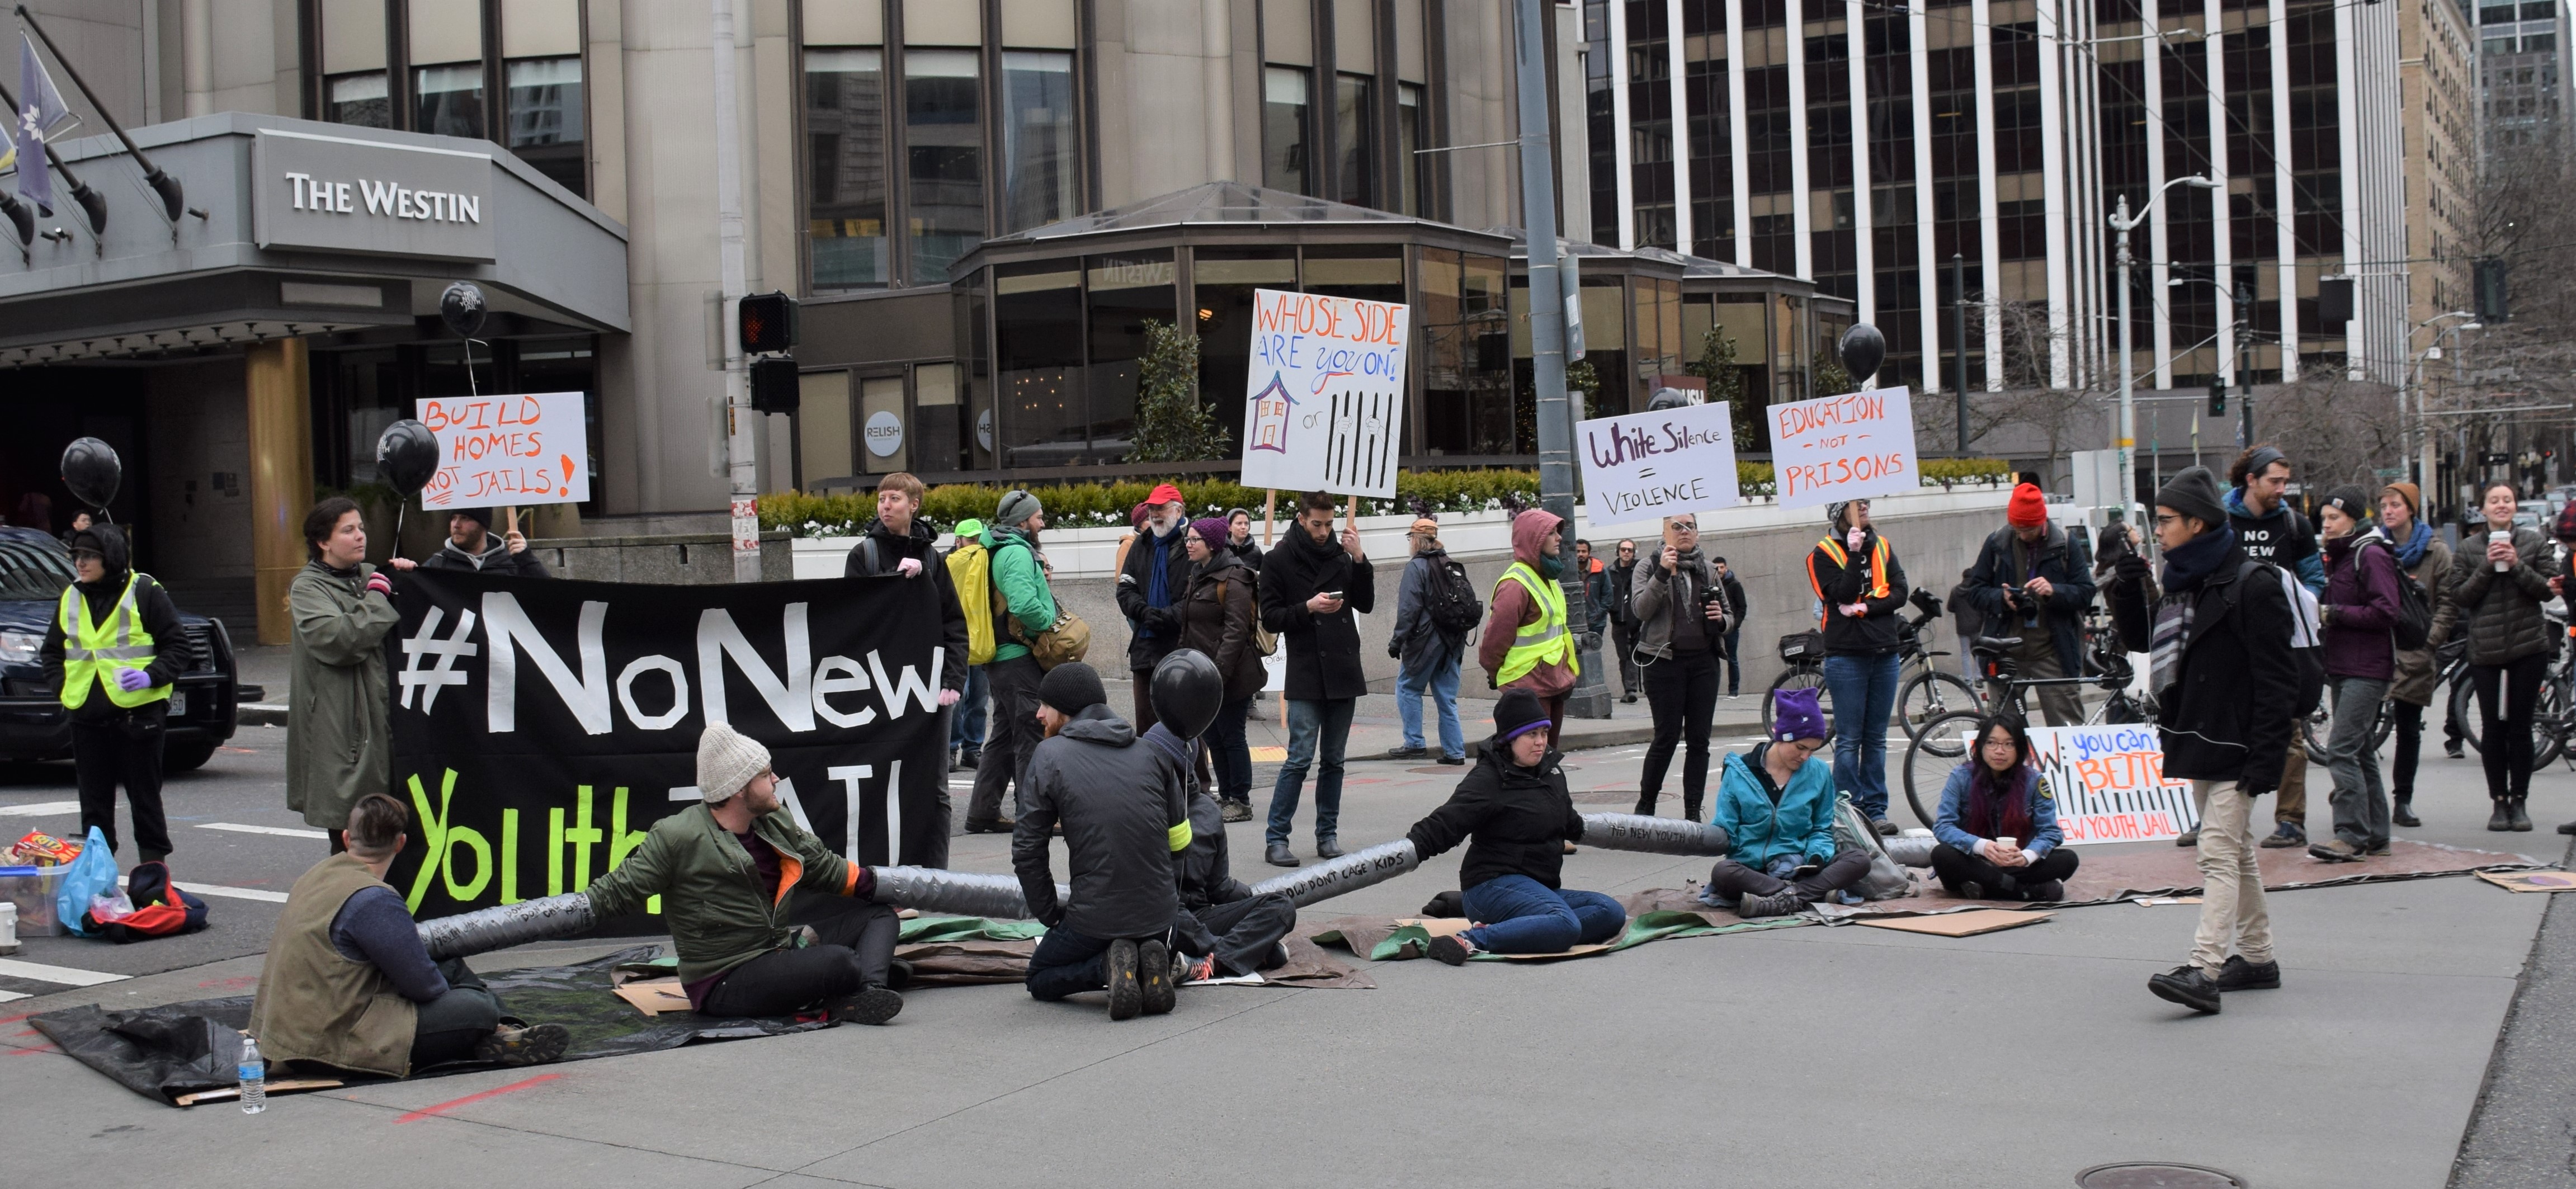 Protesters occupying the intersection outside the Westin Hotel in Seattle, WA. Liberation photo: Lee Hessler